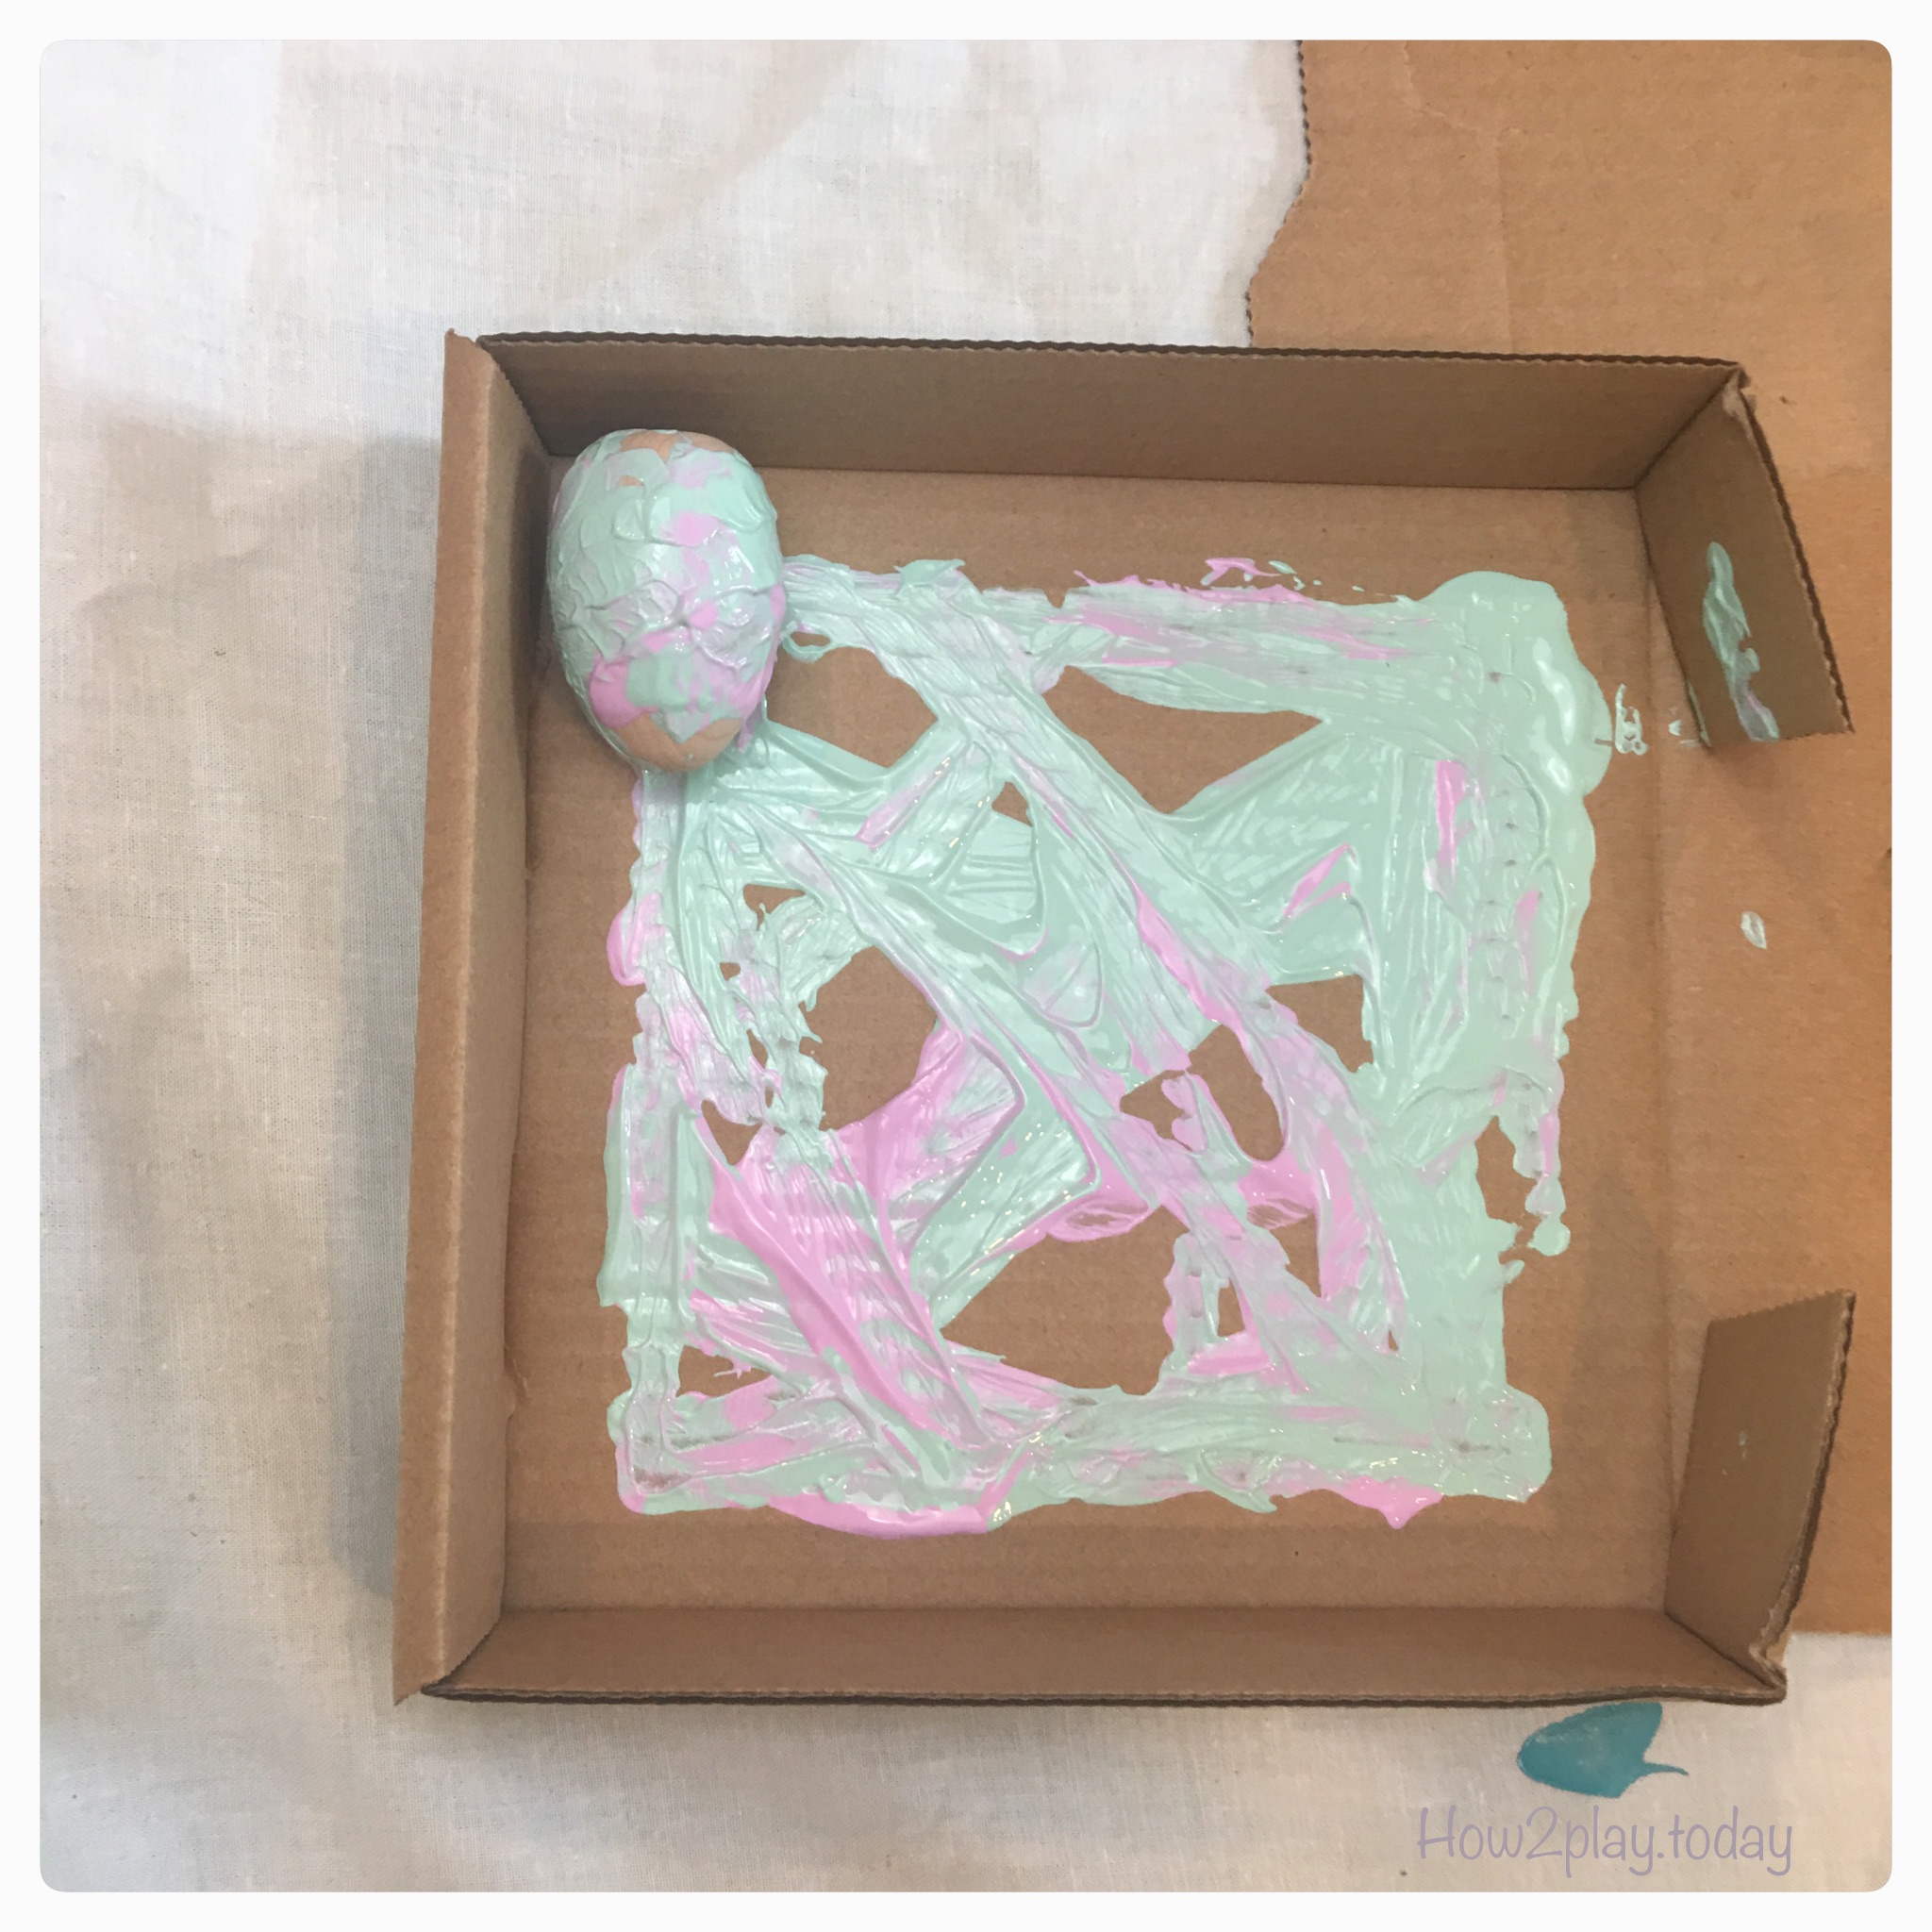 Creative DIY Easter egg art. This open-ended process art allows the kids to direct the art project by allowing them options and embracing the mess. The process becomes the fun focus and not necessarily the product because whatever the end result is, will be beautiful.